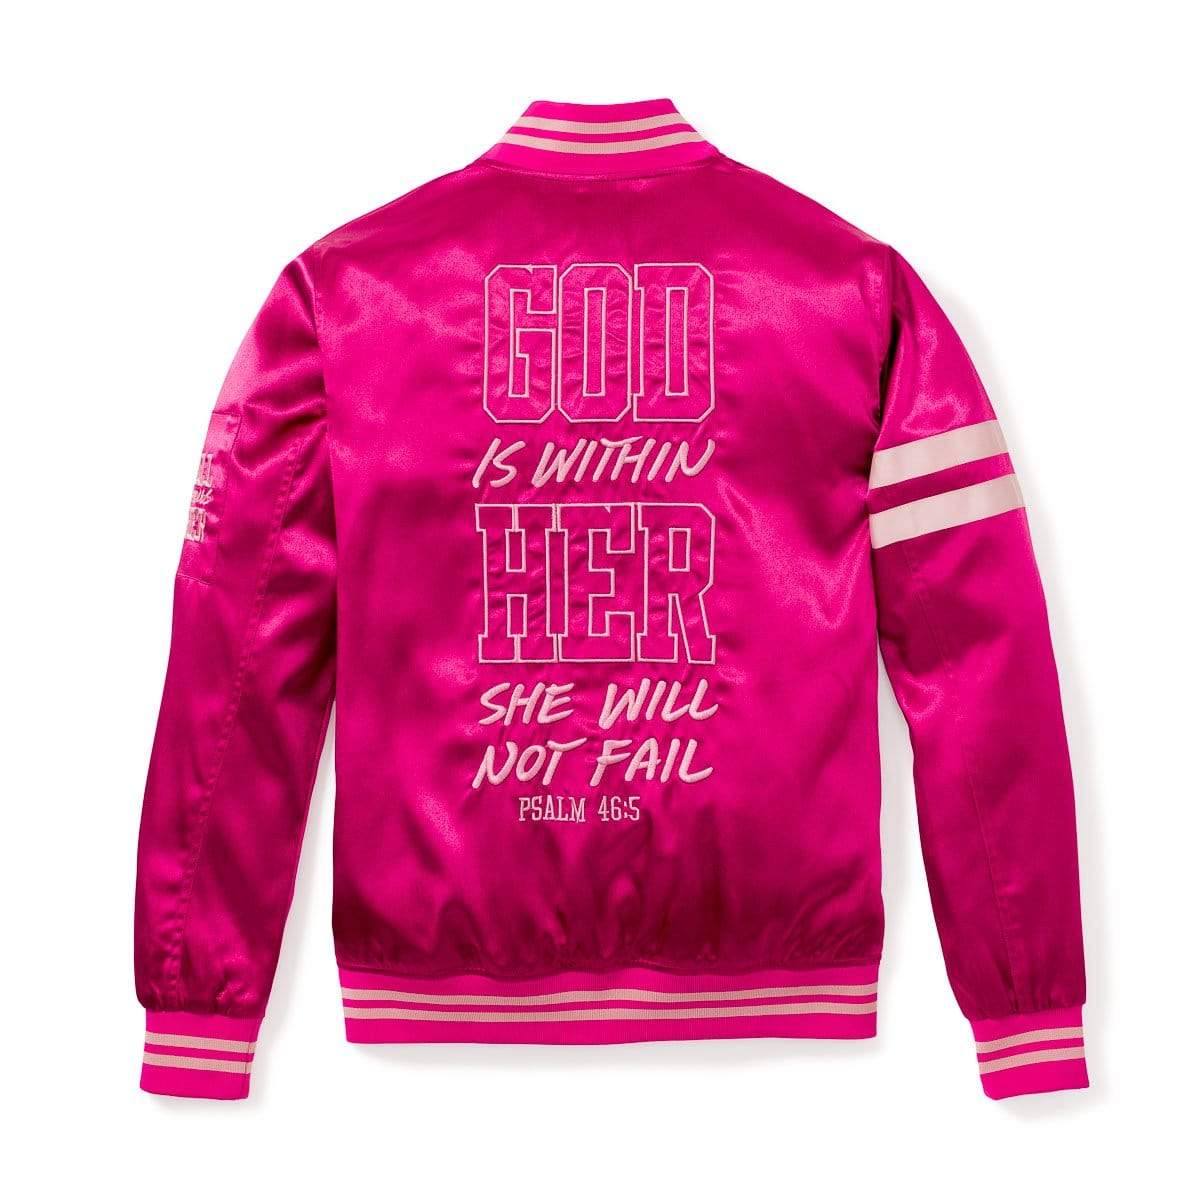 3:16 Collection Jacket XS WITHIN HER - WOMEN'S BOMBER JACKET - FUCHSIA